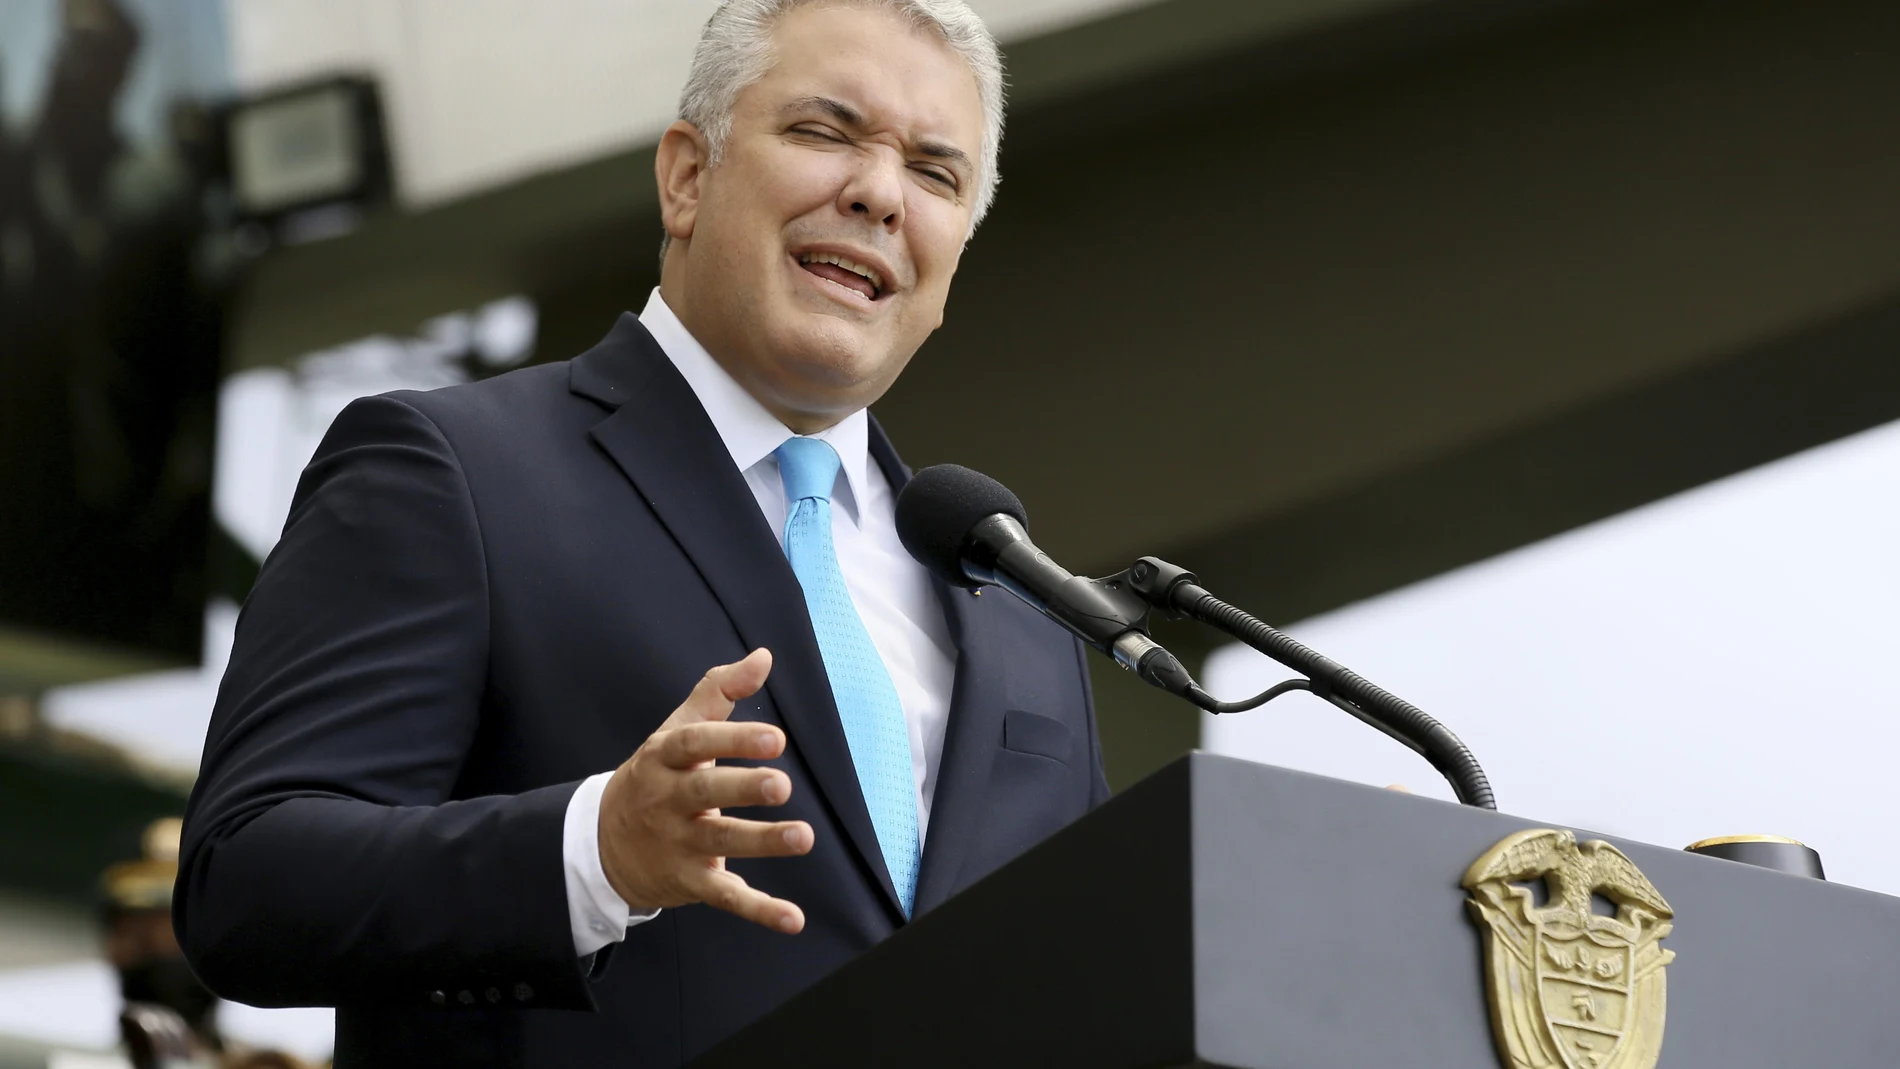 Colombia's President Ivan Duque speaks during a military parade celebrating the country's 211 years of independence from Spain, at the General Jose Maria Cordoba Military School for Cadets in Bogota, Colombia, Tuesday, July 20, 2021. (AP Photo/Leonardo Munoz)